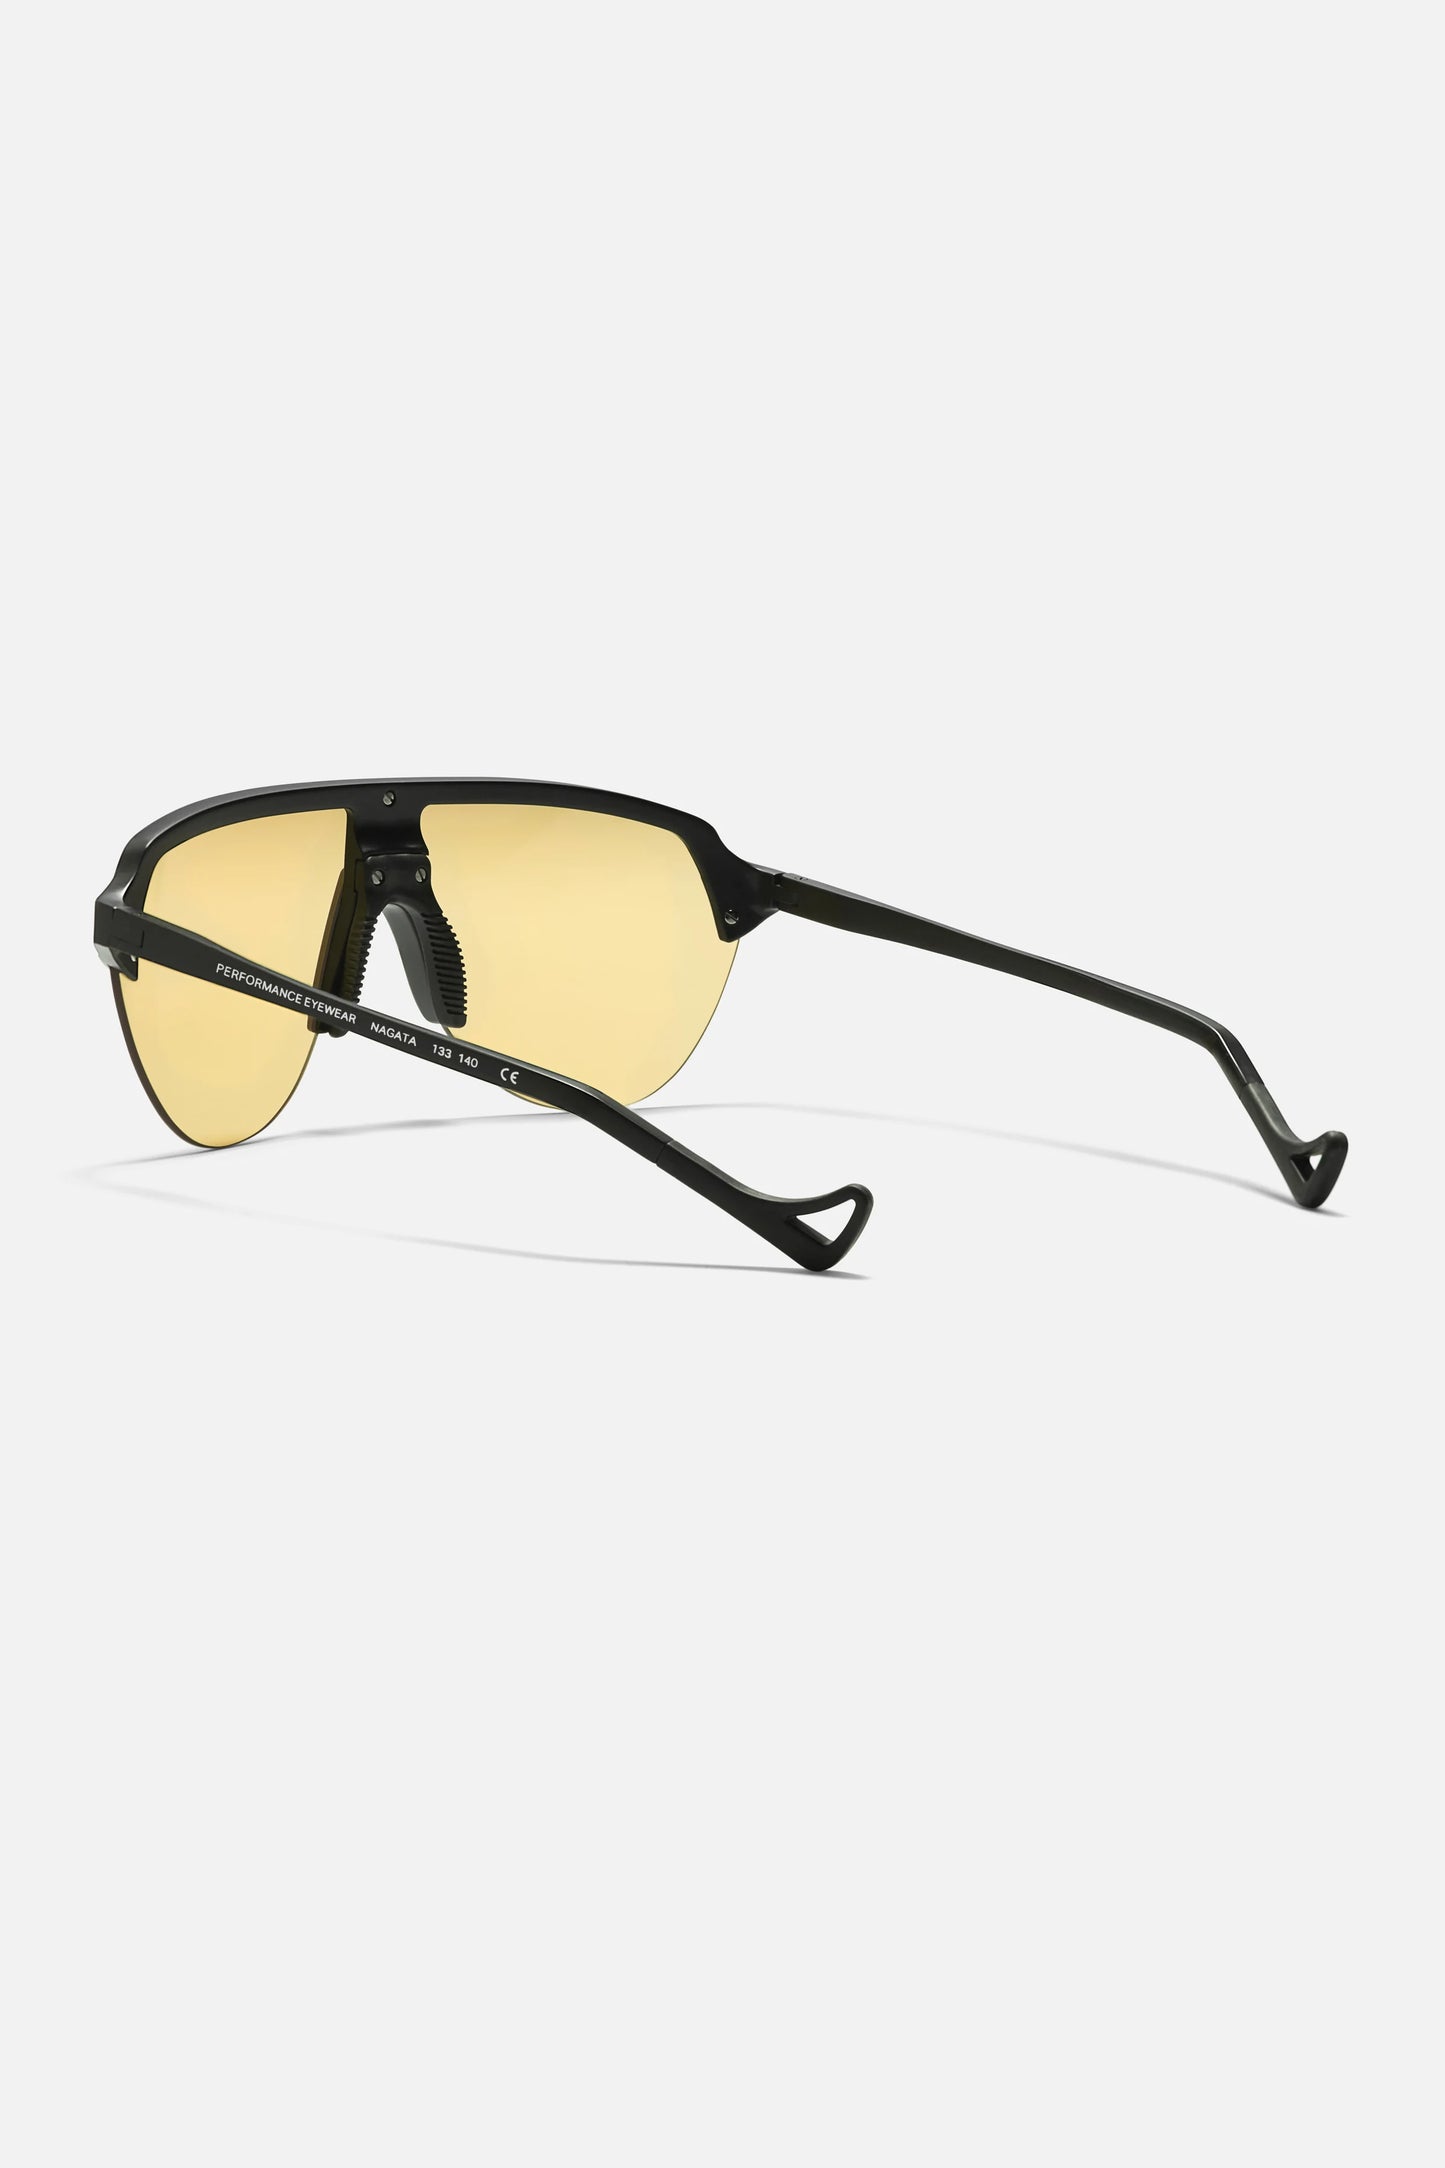 District Vision Nagata Speed Blade Sunglasses in Black/Yellow Lens